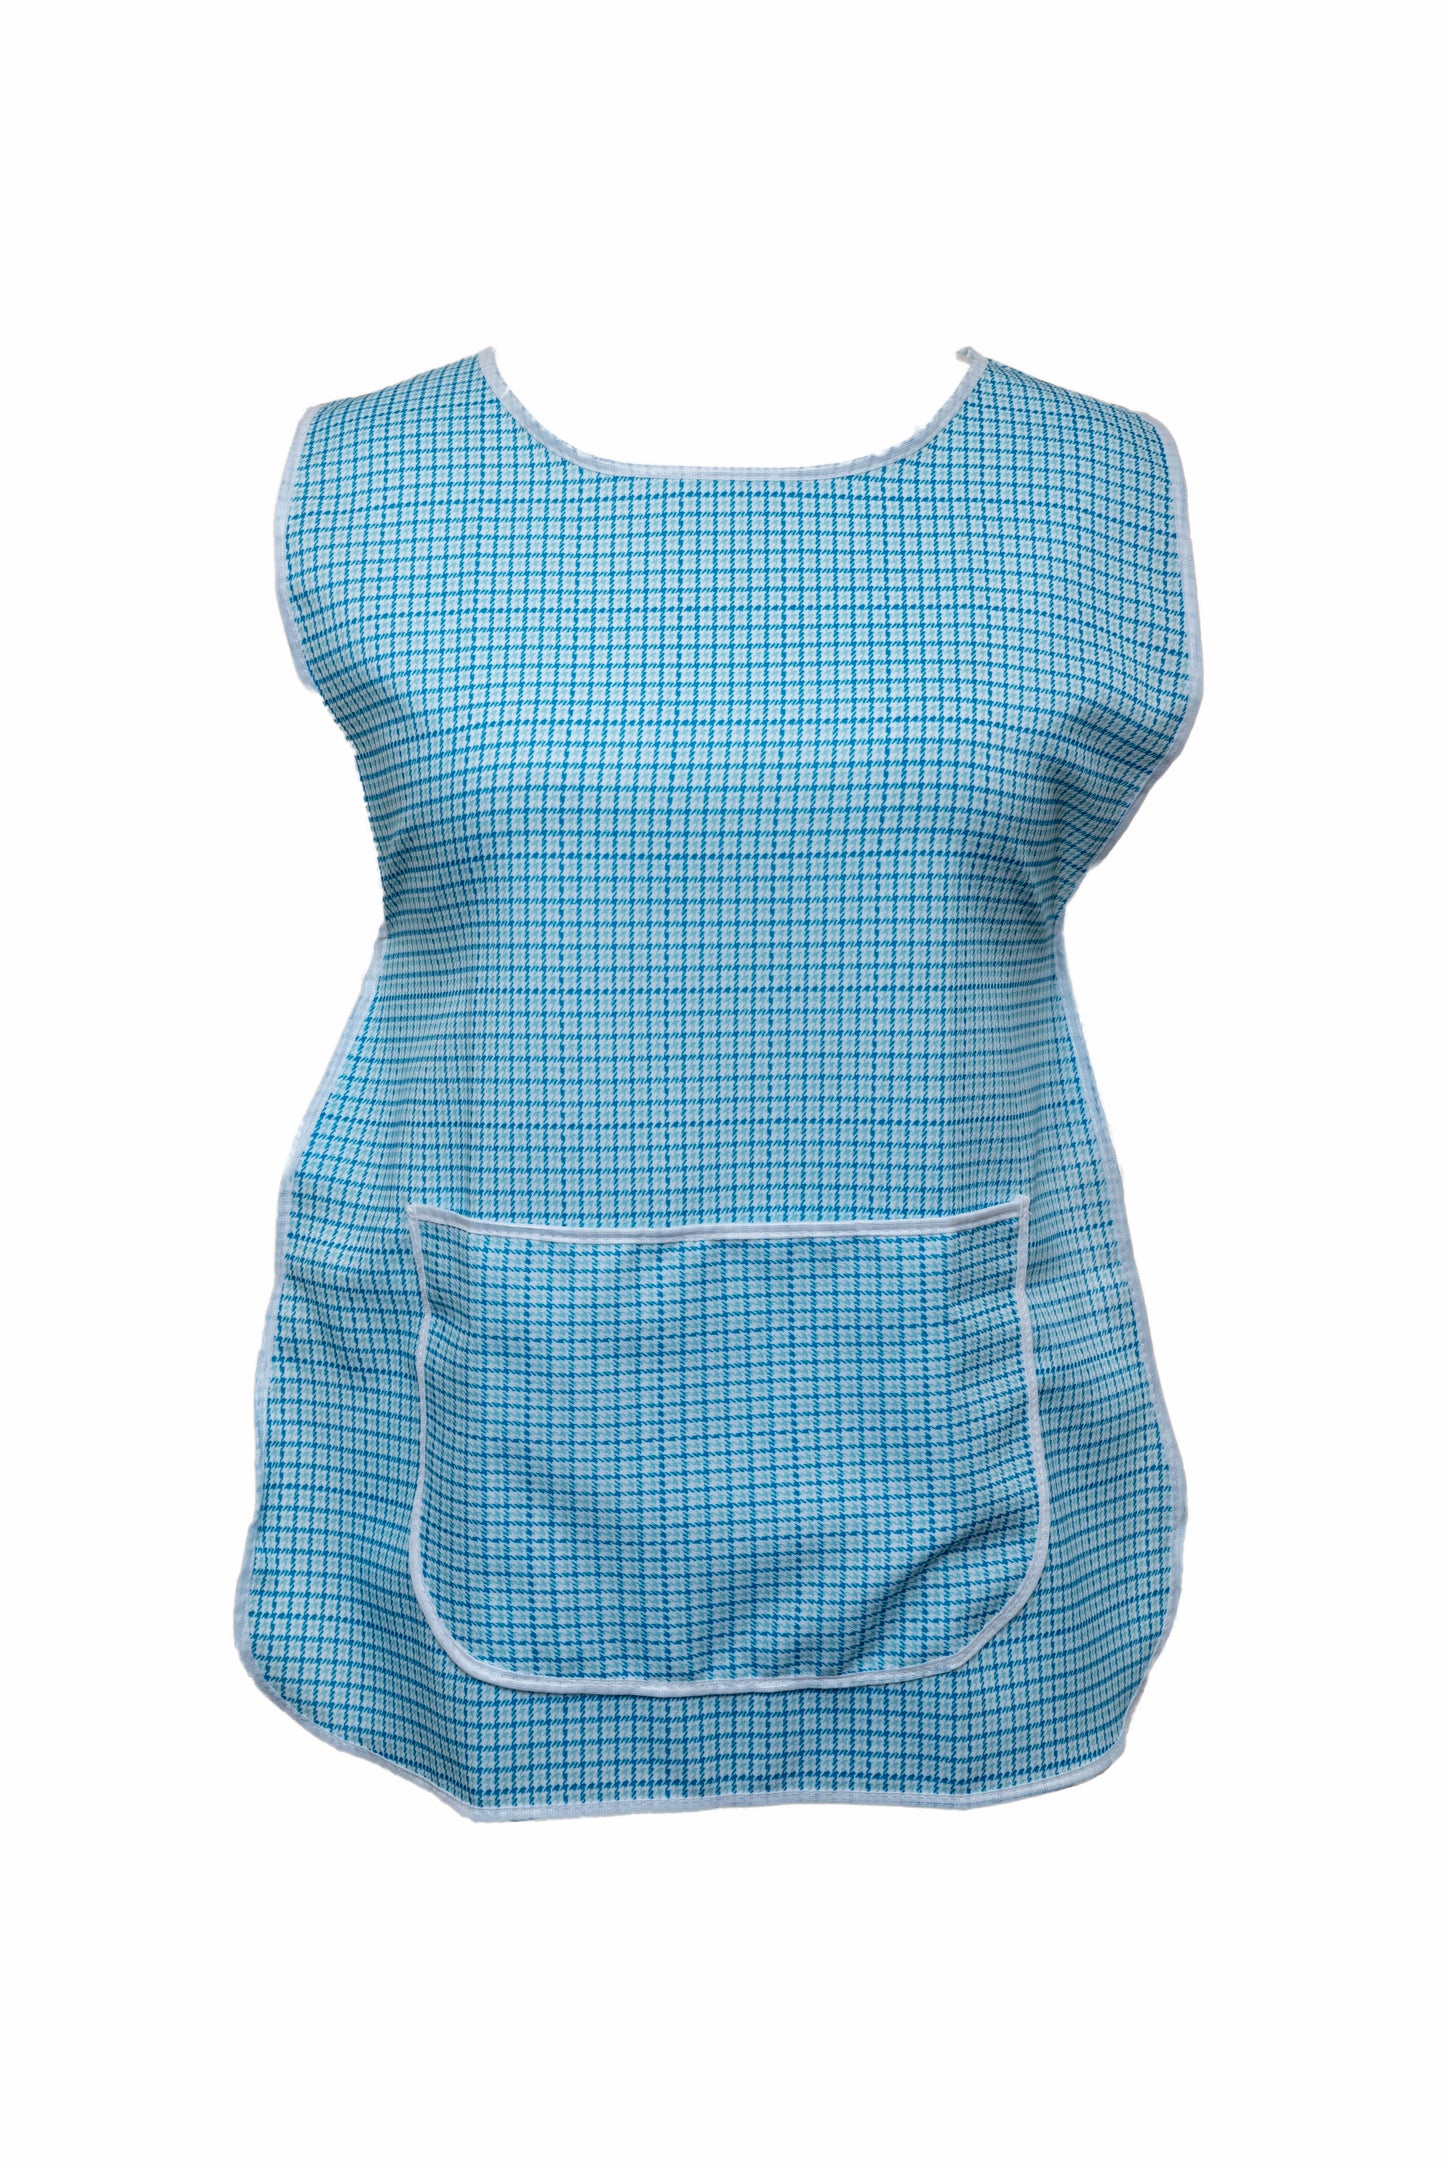 Tabard-Button Side-Over the Head-Check-Large Front Pocket-Blue/Blue